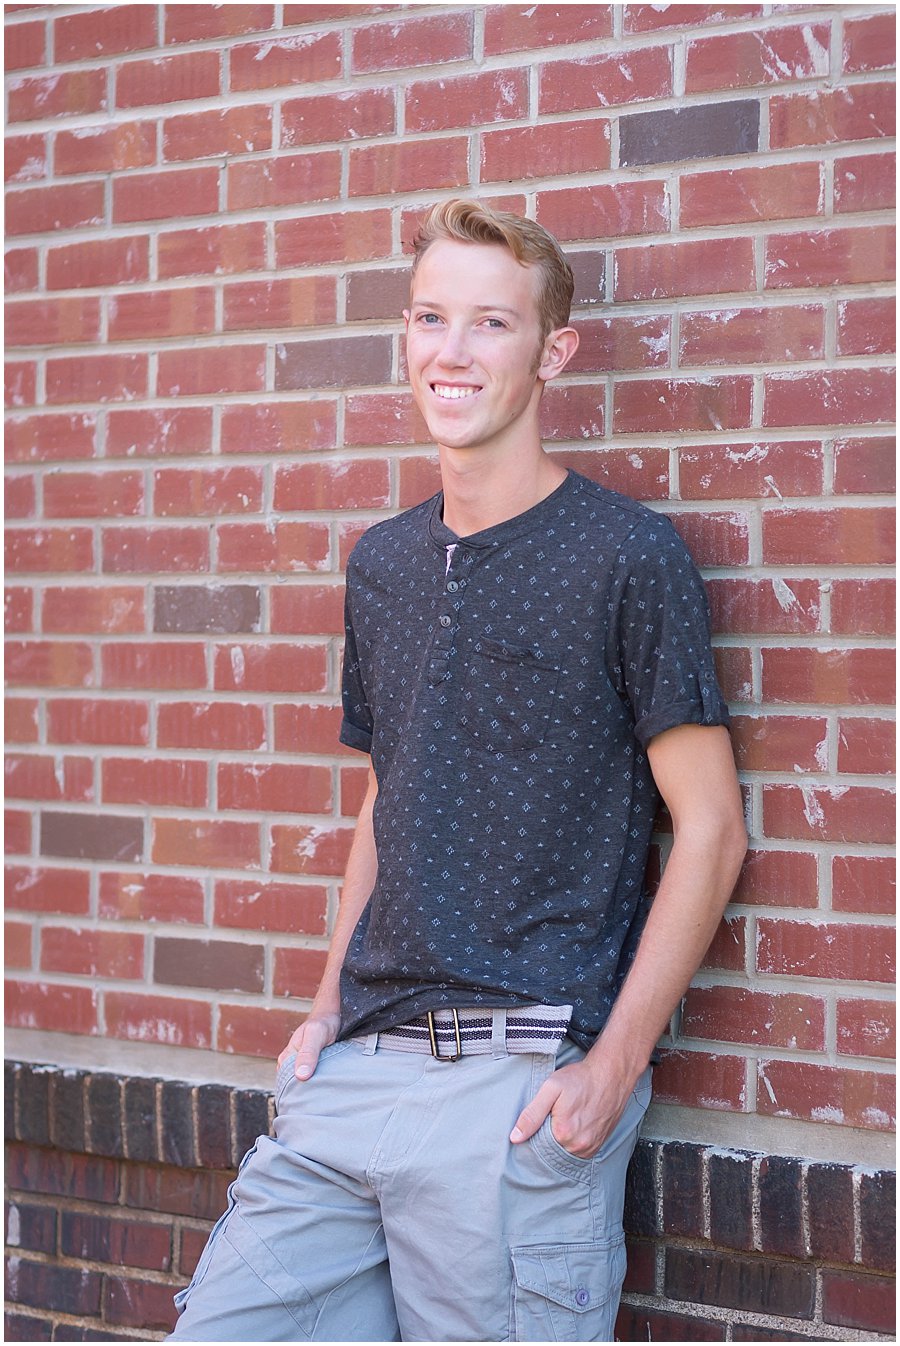 Nate-Triway-Class of 2018-Spokesmodel